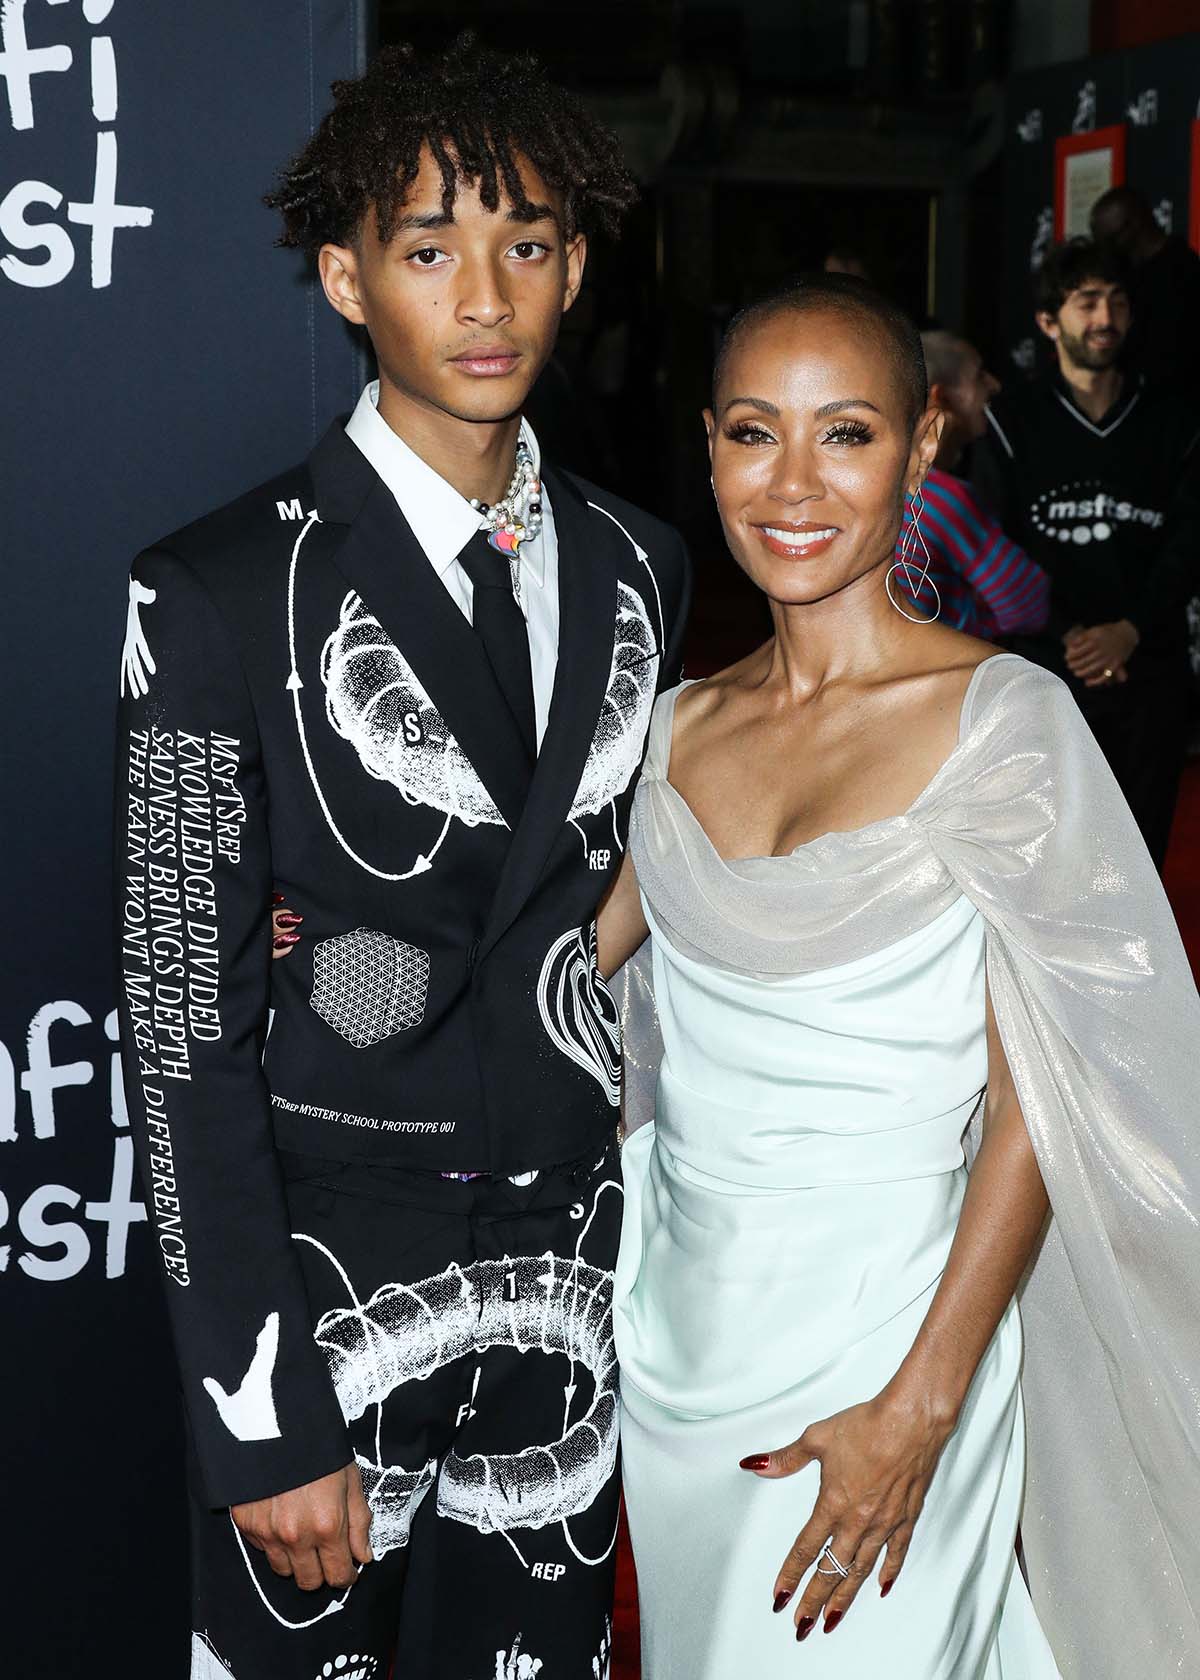 Willow and Jaden Smith moved out of their family home